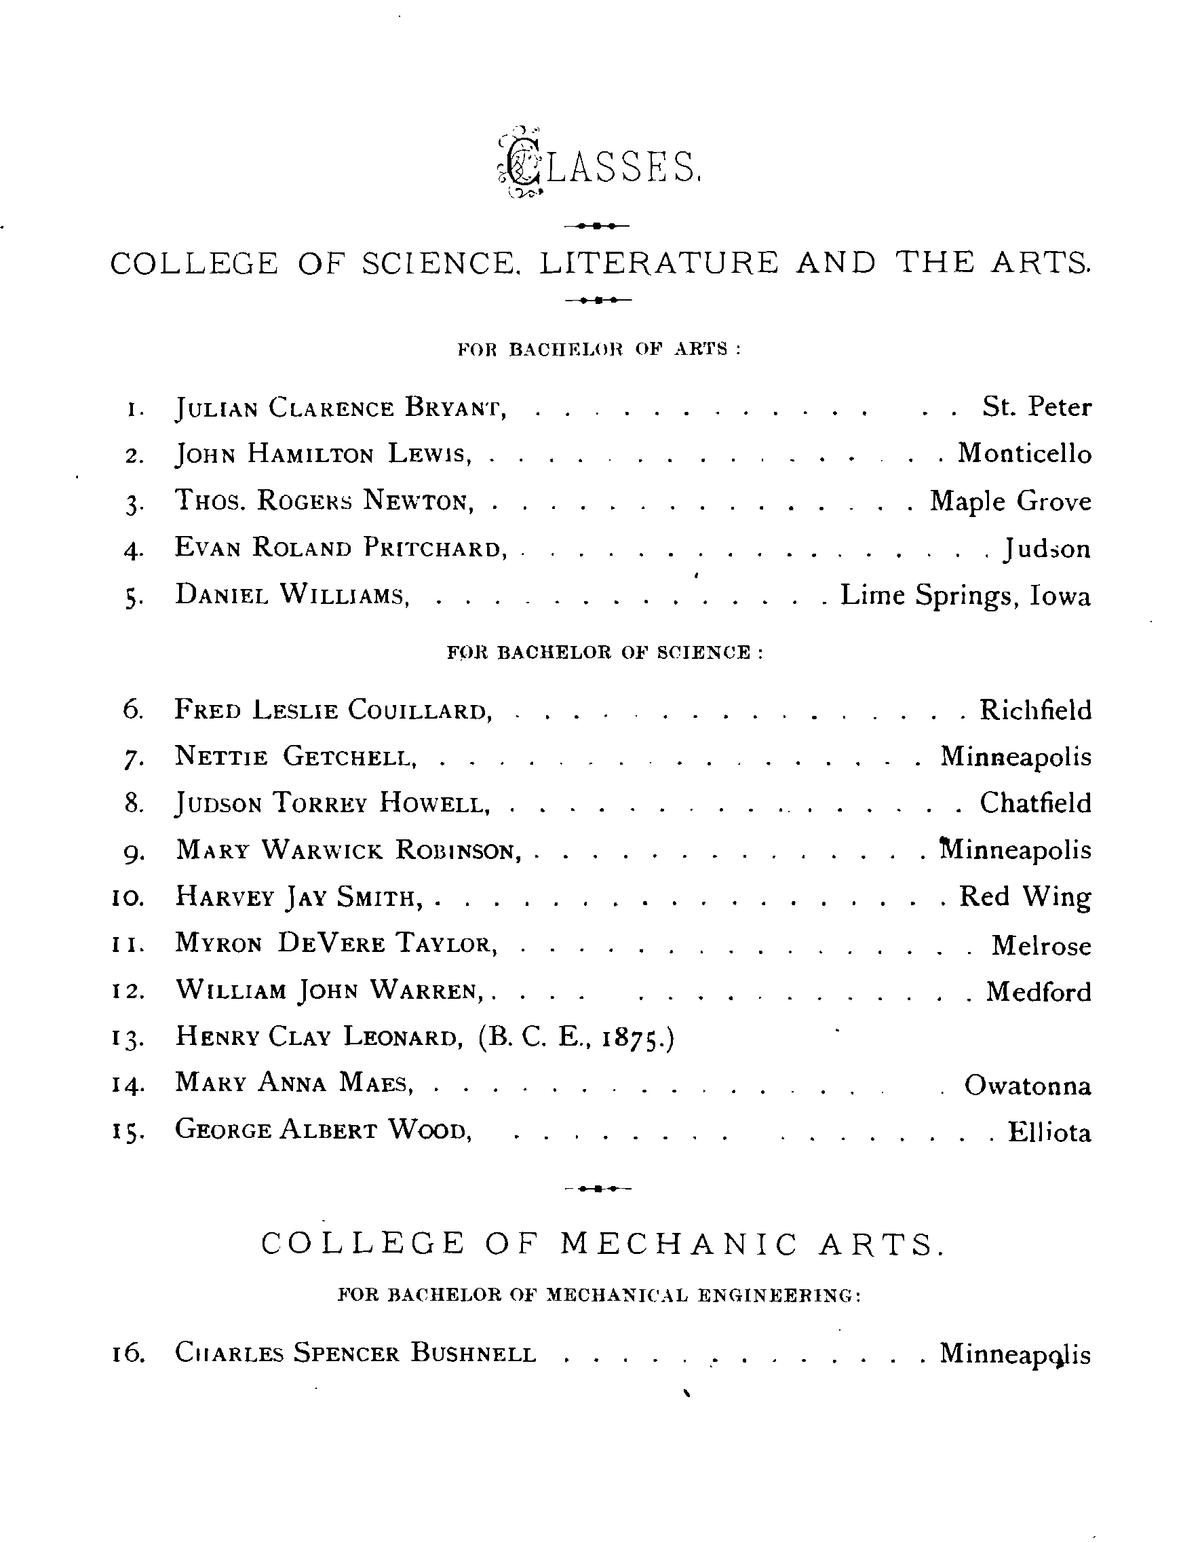 Commencement list of 1878 Class